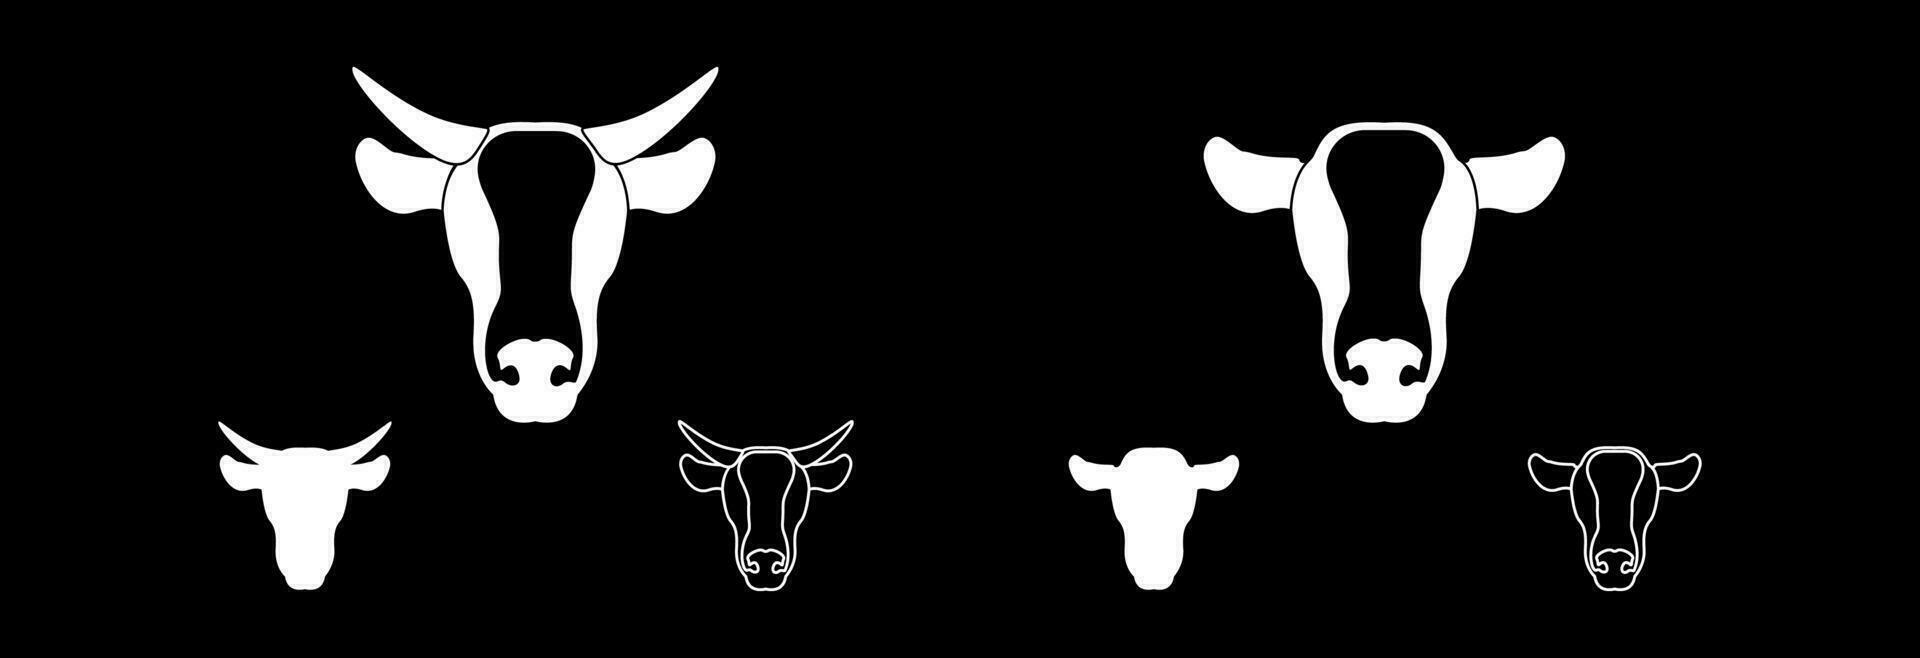 Cow head icon with horns and without horns on a black background. vector